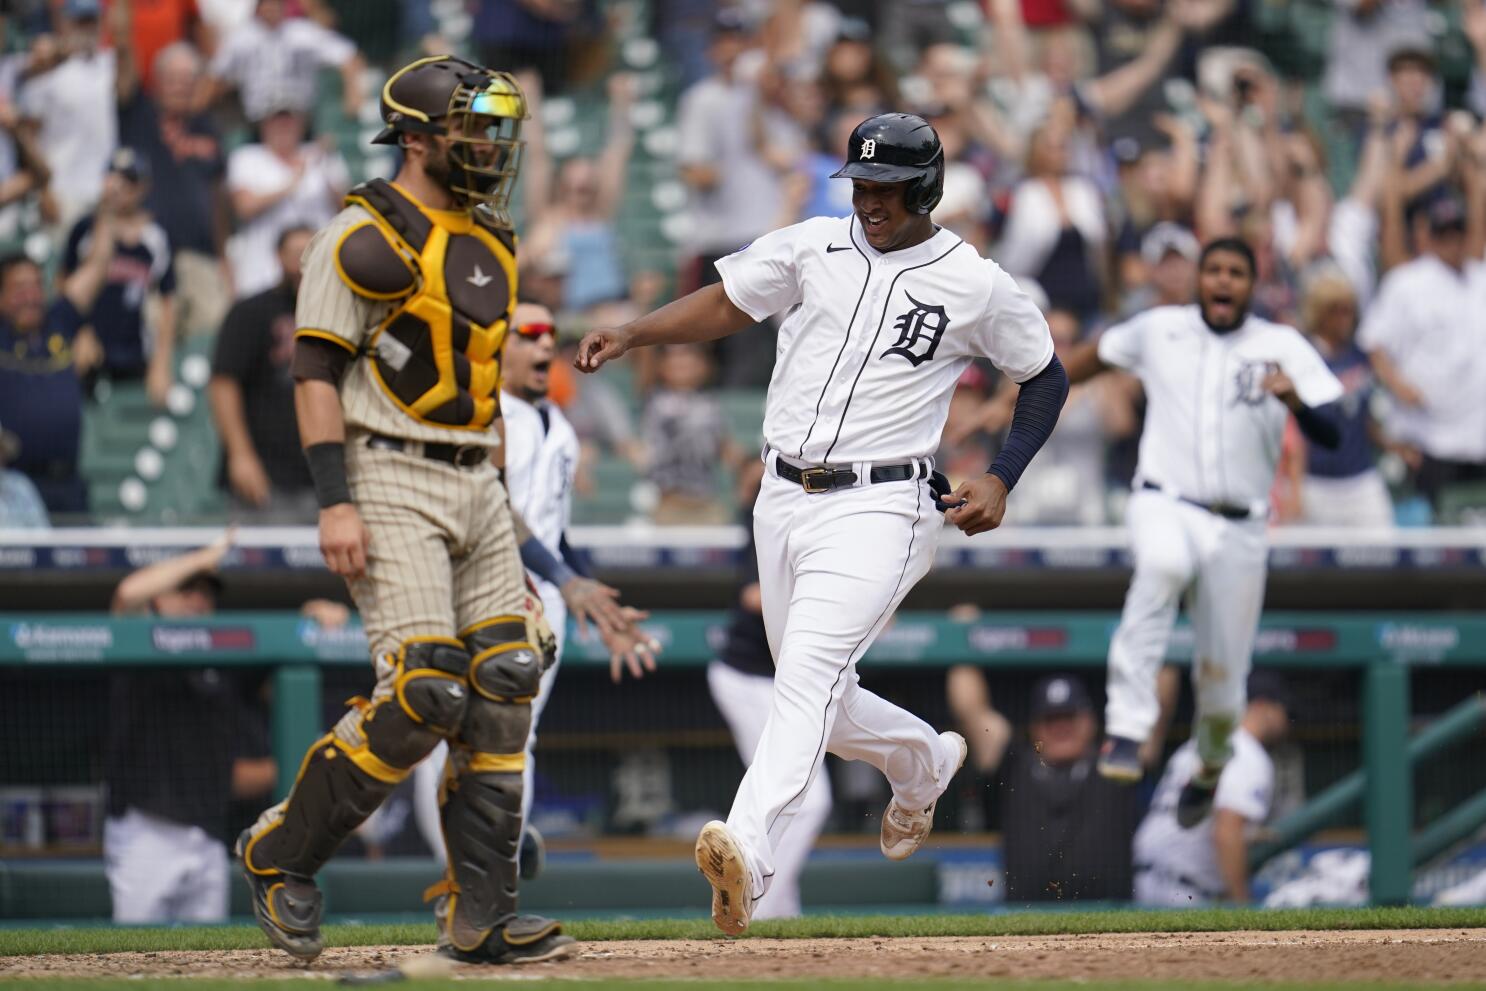 How to Watch the San Diego Padres vs. Detroit Tigers - MLB (7/25